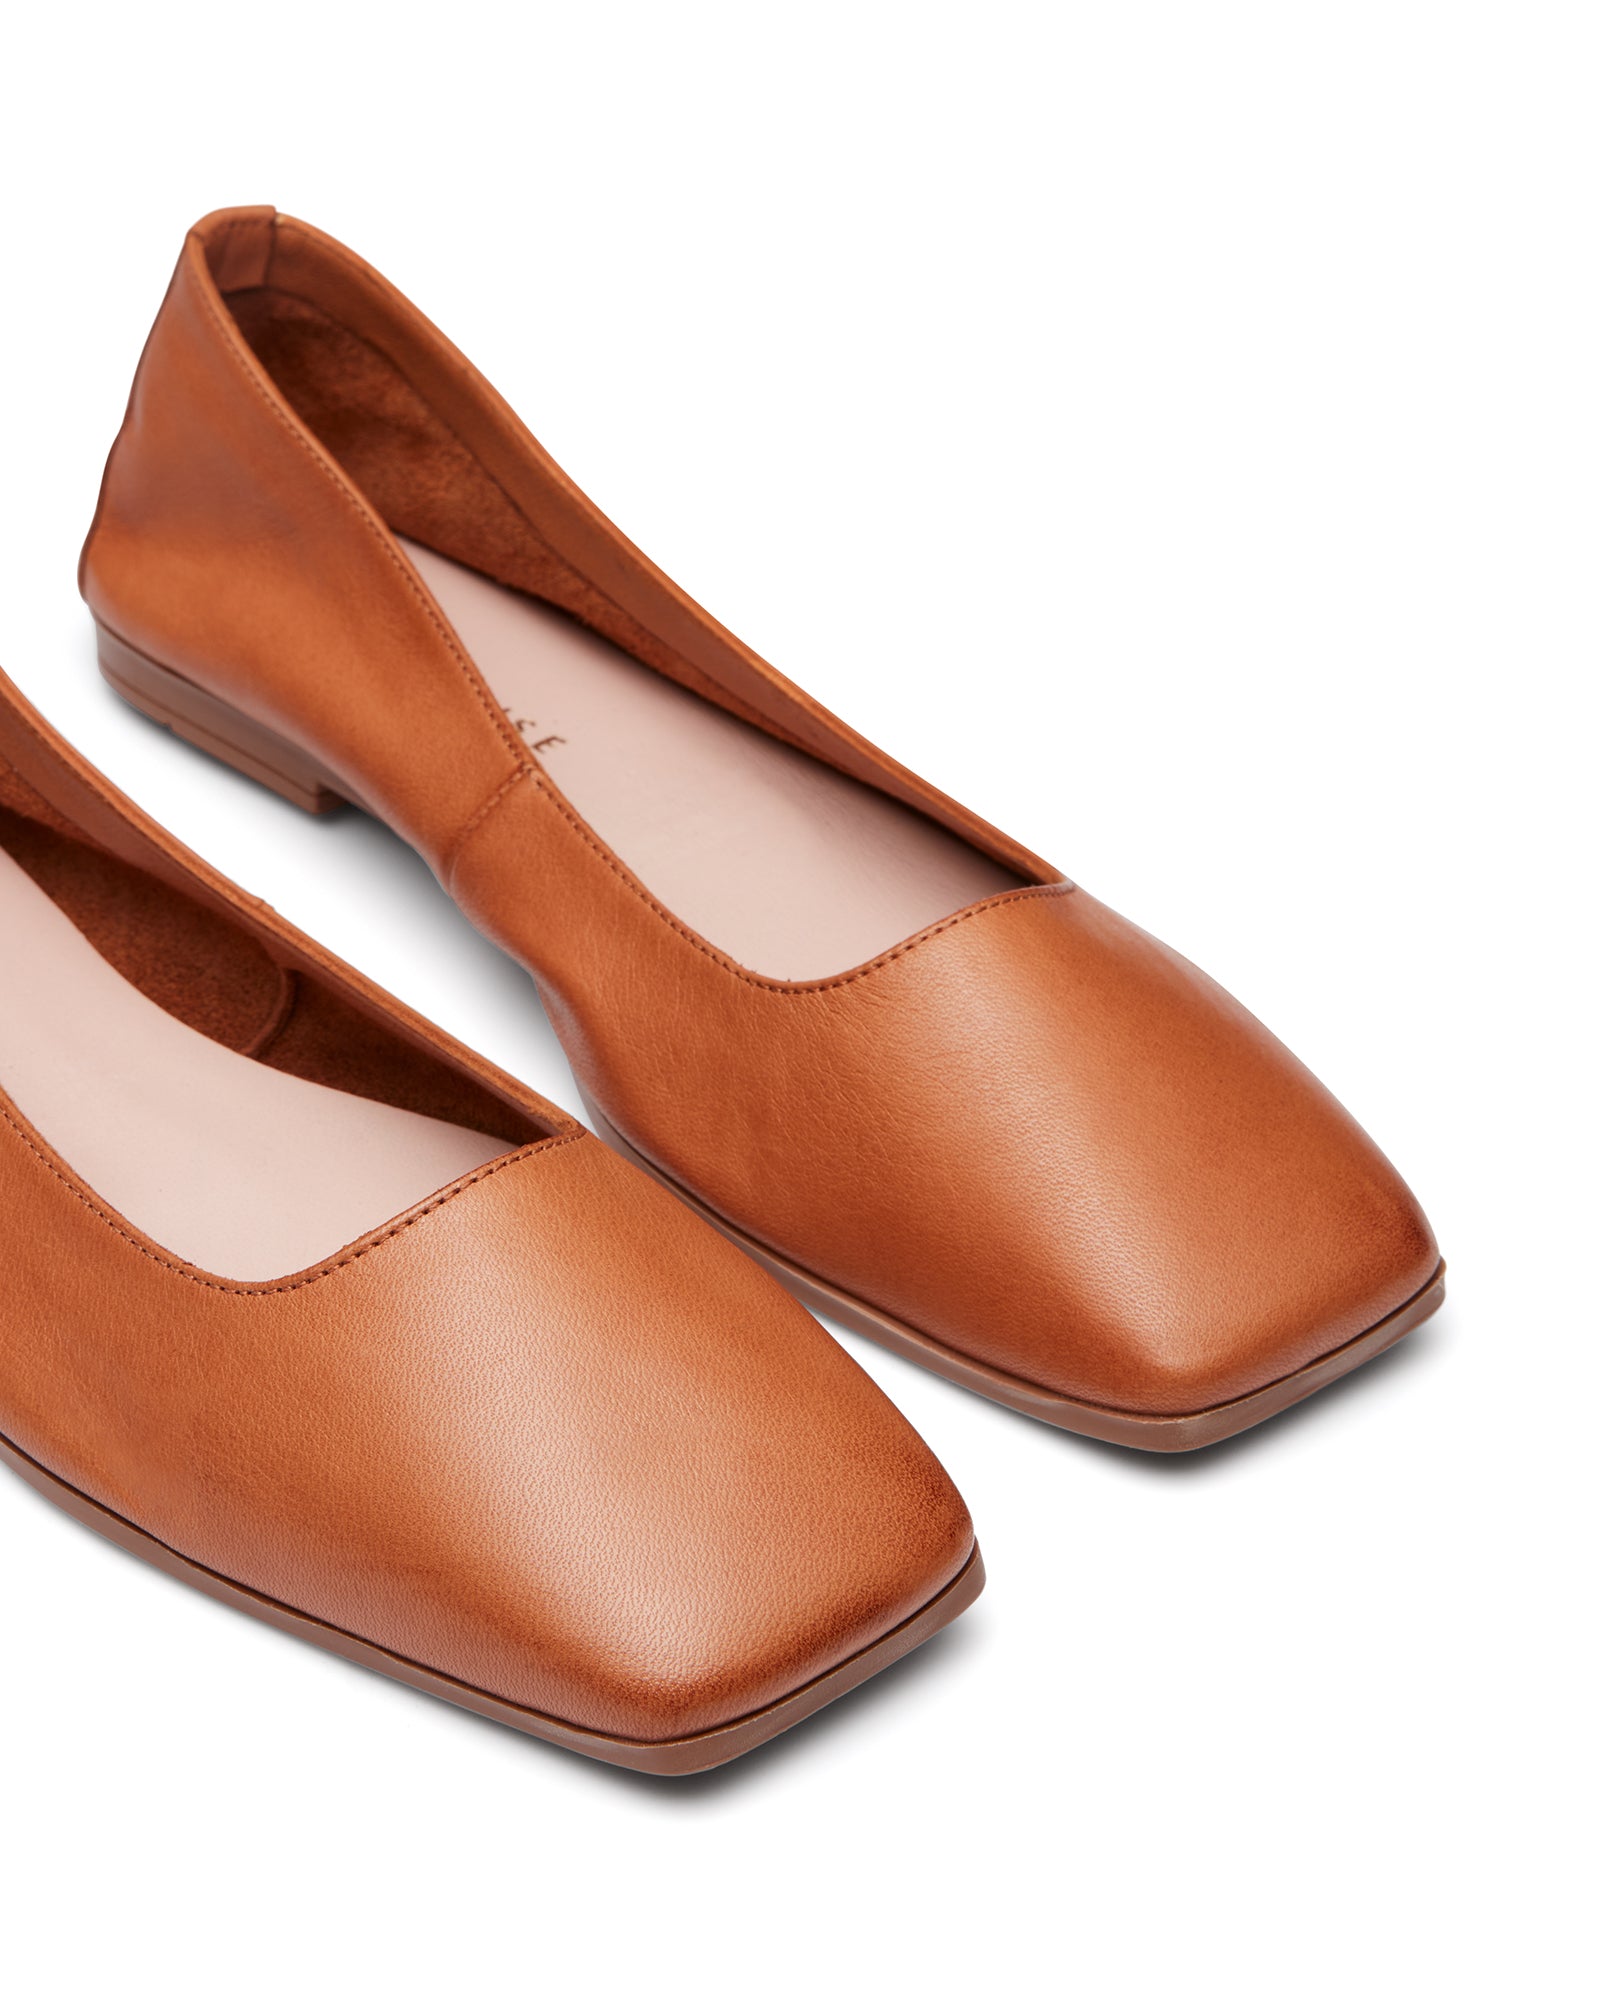 Just Because Shoes Beck Tan | Leather Flats | Ballet | Slip On | Square